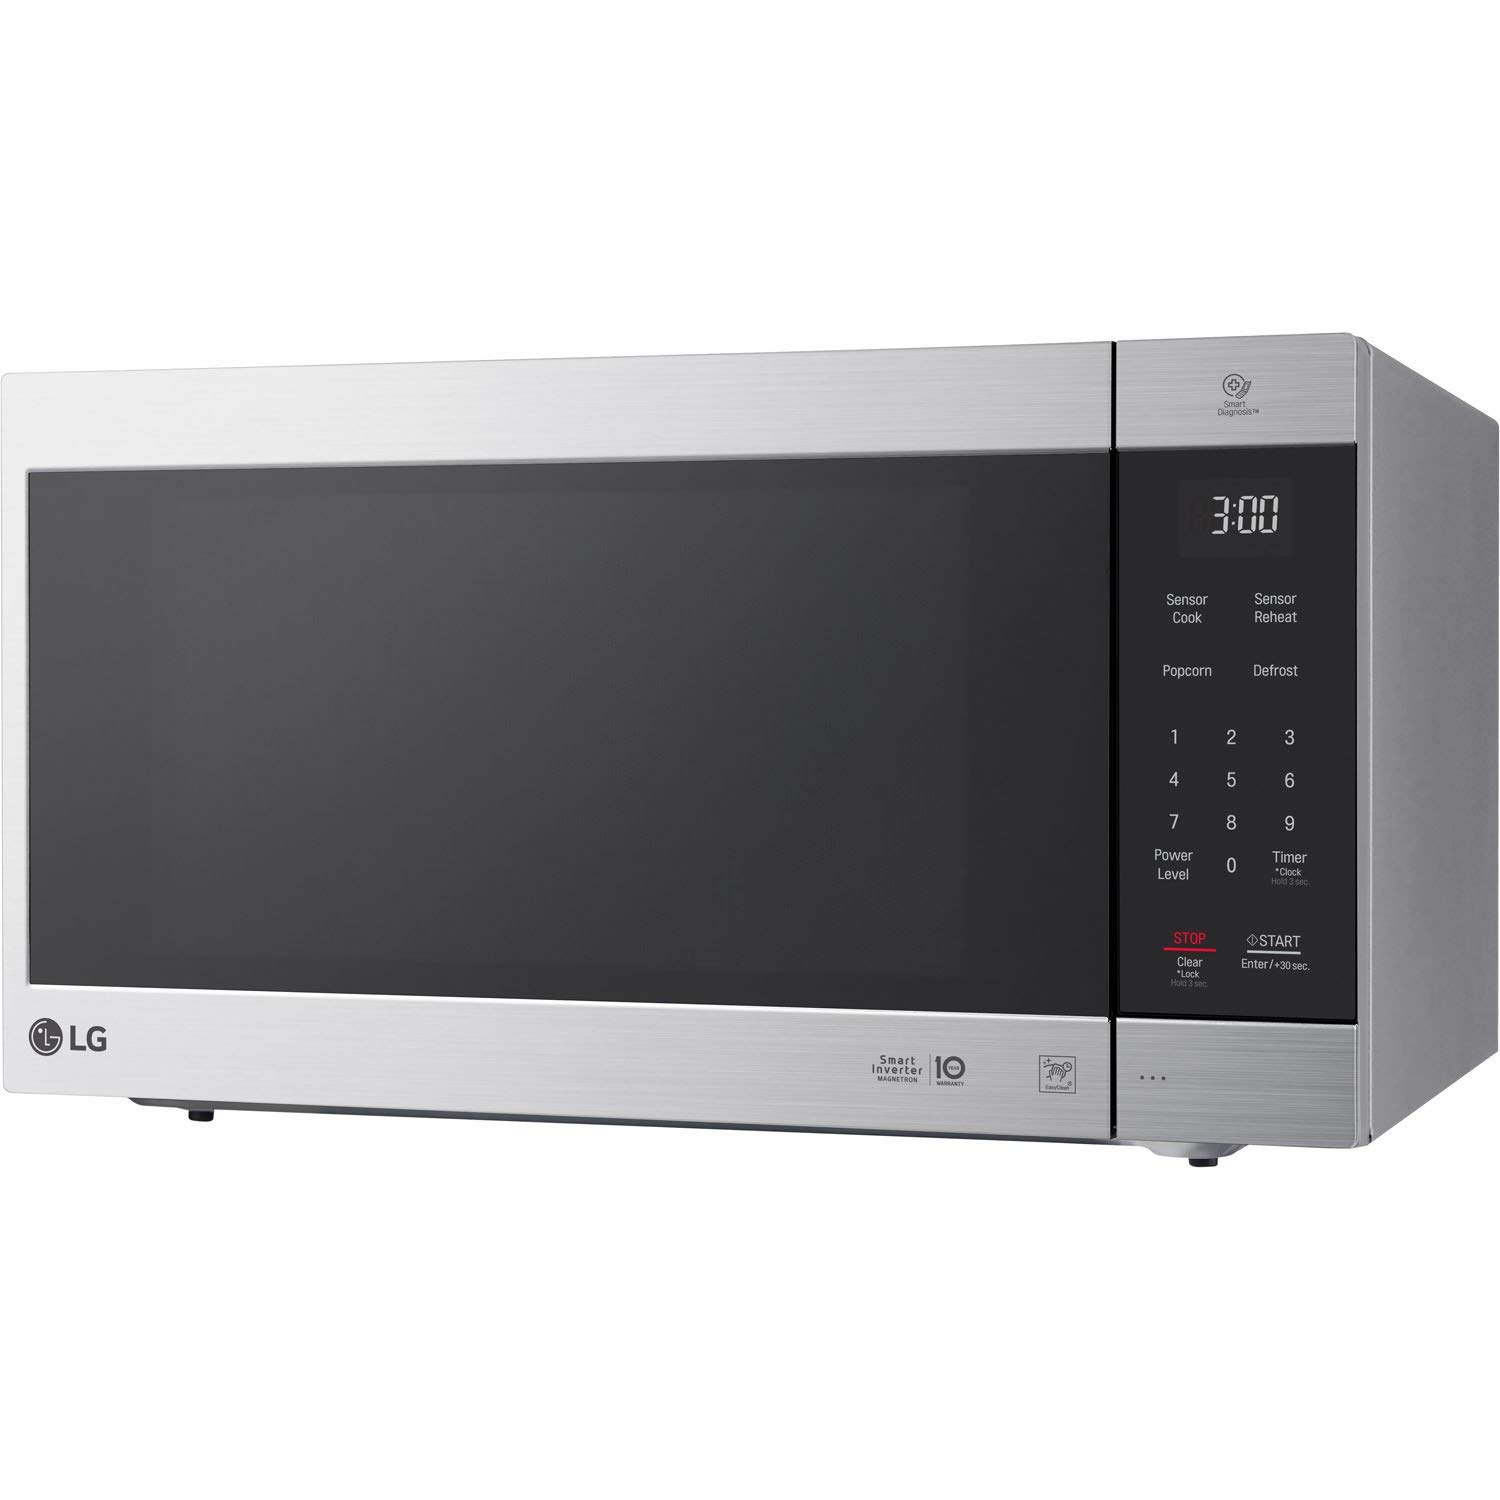 LG 2.0 Cu. Ft. NeoChef Countertop Microwave (LMC2075) Stainless Steel – New